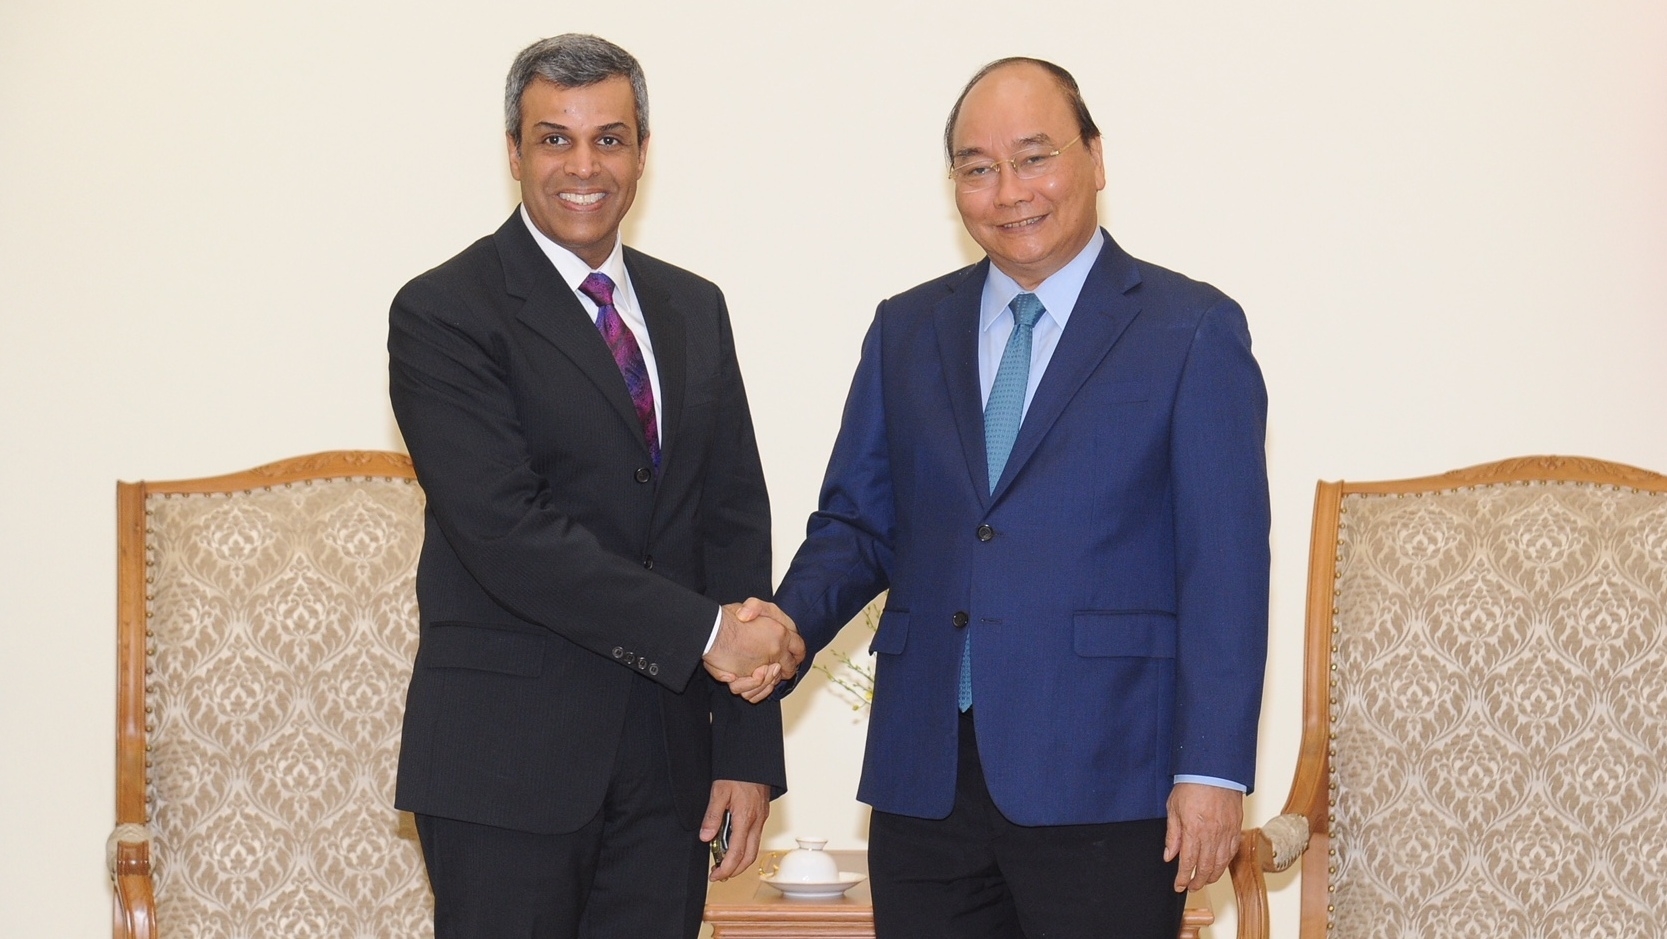 Prime Minister Nguyen Xuan Phuc (R) and Kuwaiti Minister of Oil and Electricity and Water Khaled Ali Al Fadhel. Photo: NDO